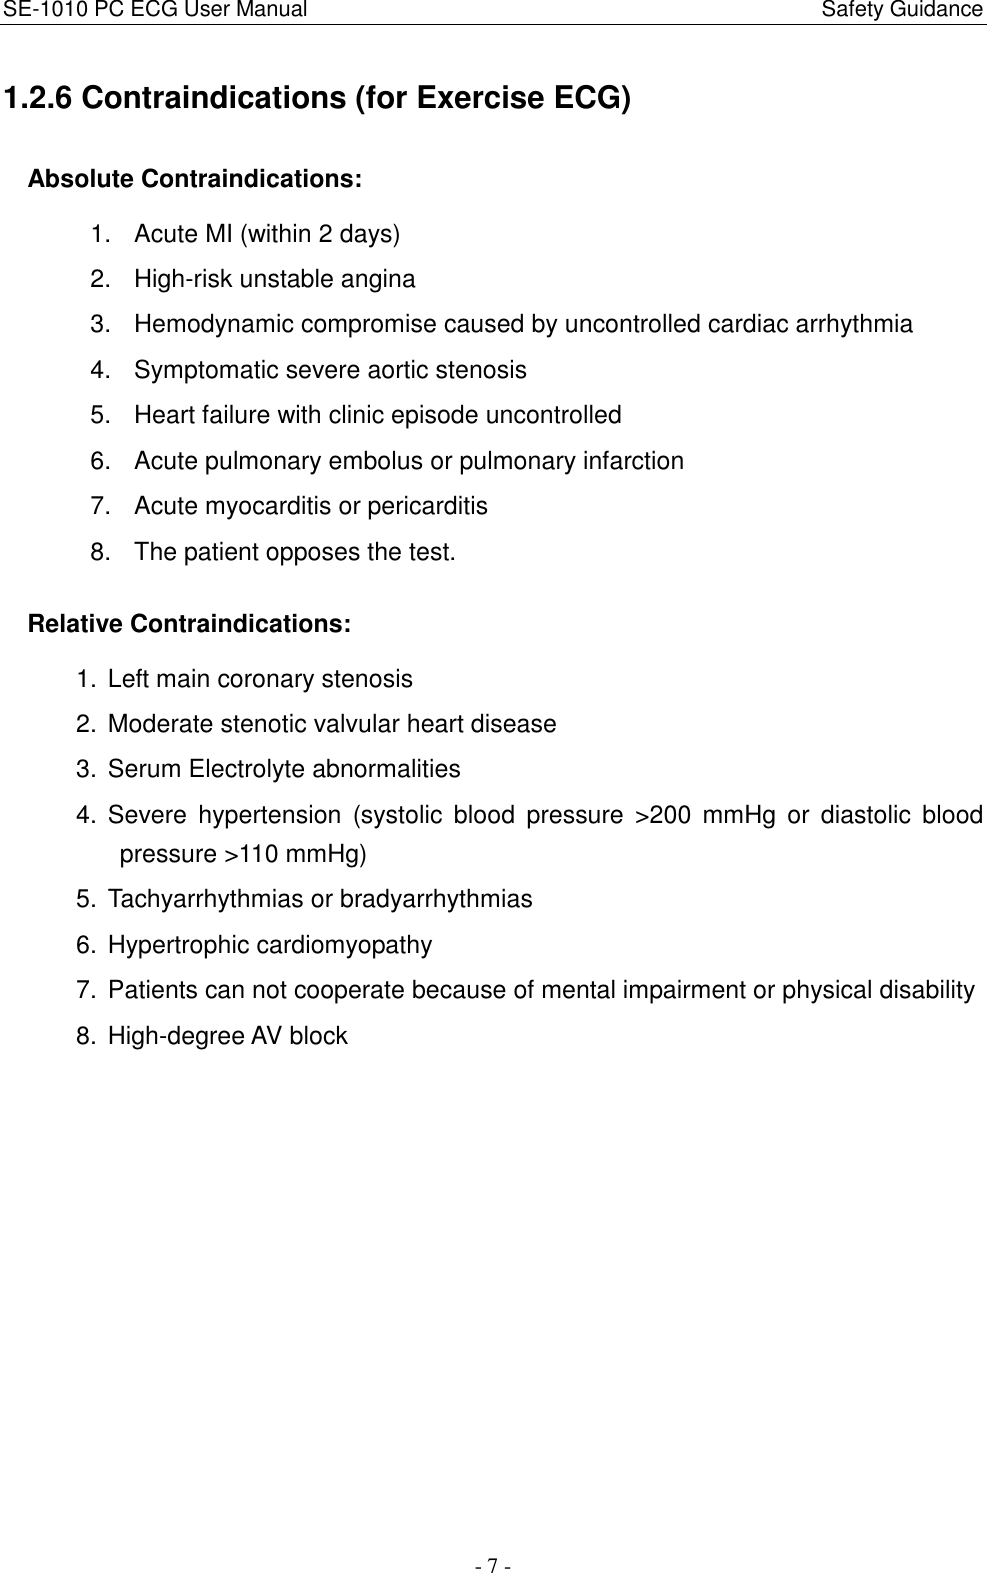 SE-1010 PC ECG User Manual                                                                                              Safety Guidance - 7 - 1.2.6 Contraindications (for Exercise ECG) Absolute Contraindications: 1.  Acute MI (within 2 days) 2.  High-risk unstable angina 3.  Hemodynamic compromise caused by uncontrolled cardiac arrhythmia 4.  Symptomatic severe aortic stenosis 5.  Heart failure with clinic episode uncontrolled 6.  Acute pulmonary embolus or pulmonary infarction 7.  Acute myocarditis or pericarditis 8.  The patient opposes the test. Relative Contraindications: 1.  Left main coronary stenosis 2.  Moderate stenotic valvular heart disease 3.  Serum Electrolyte abnormalities 4.  Severe  hypertension  (systolic  blood  pressure  &gt;200  mmHg  or  diastolic  blood pressure &gt;110 mmHg) 5.  Tachyarrhythmias or bradyarrhythmias 6.  Hypertrophic cardiomyopathy 7.  Patients can not cooperate because of mental impairment or physical disability 8.  High-degree AV block 